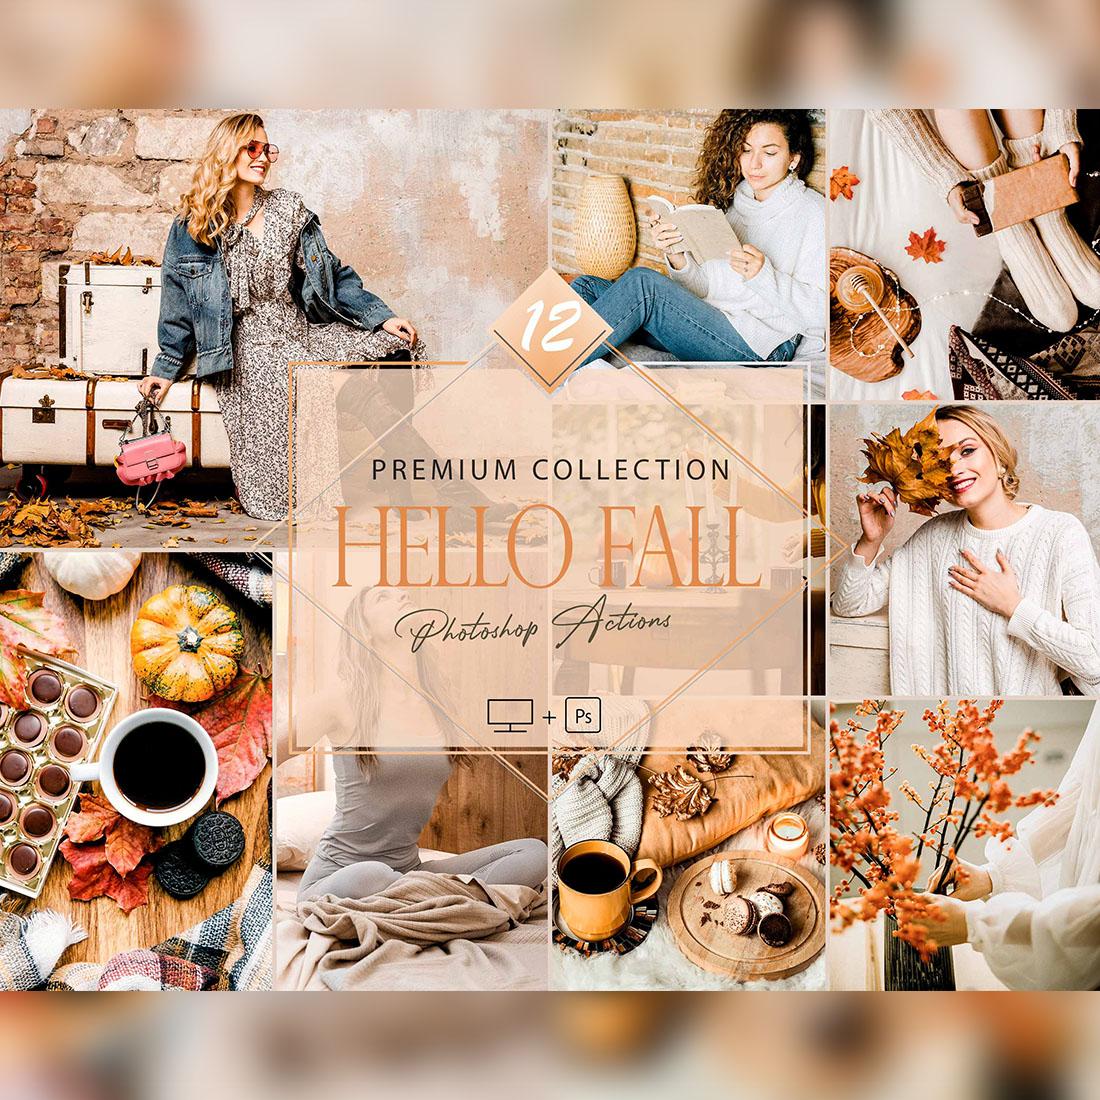 12 Photoshop Actions, Hello Fall Ps Action, Bright ACR Preset, Fall Filter, Lifestyle Theme For Instagram, Autumn Presets, Warm portrait cover image.